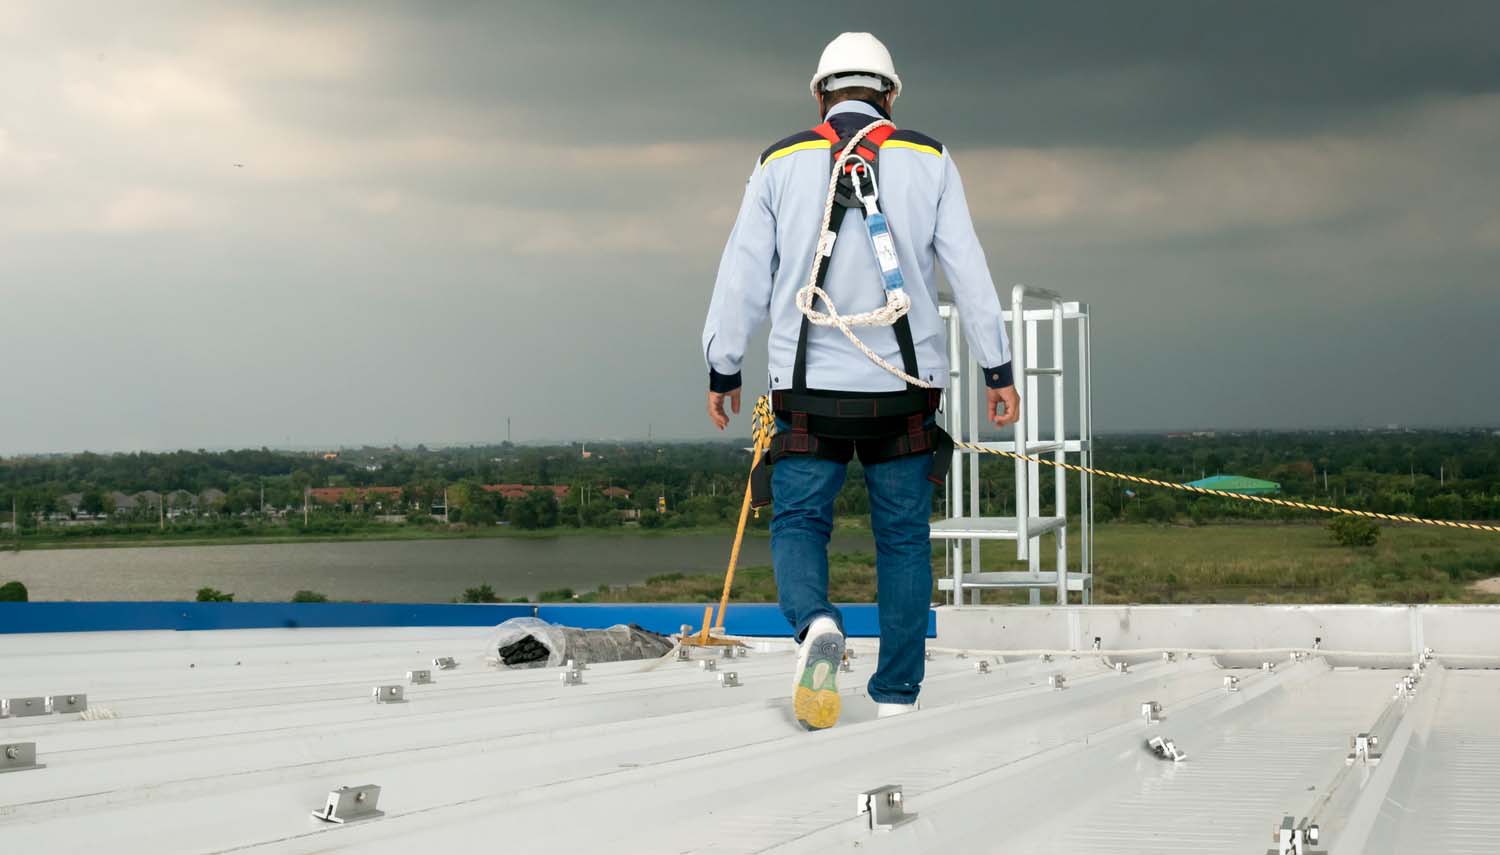 contractor in safety gear walking across a san antonio metal roof during an inspection